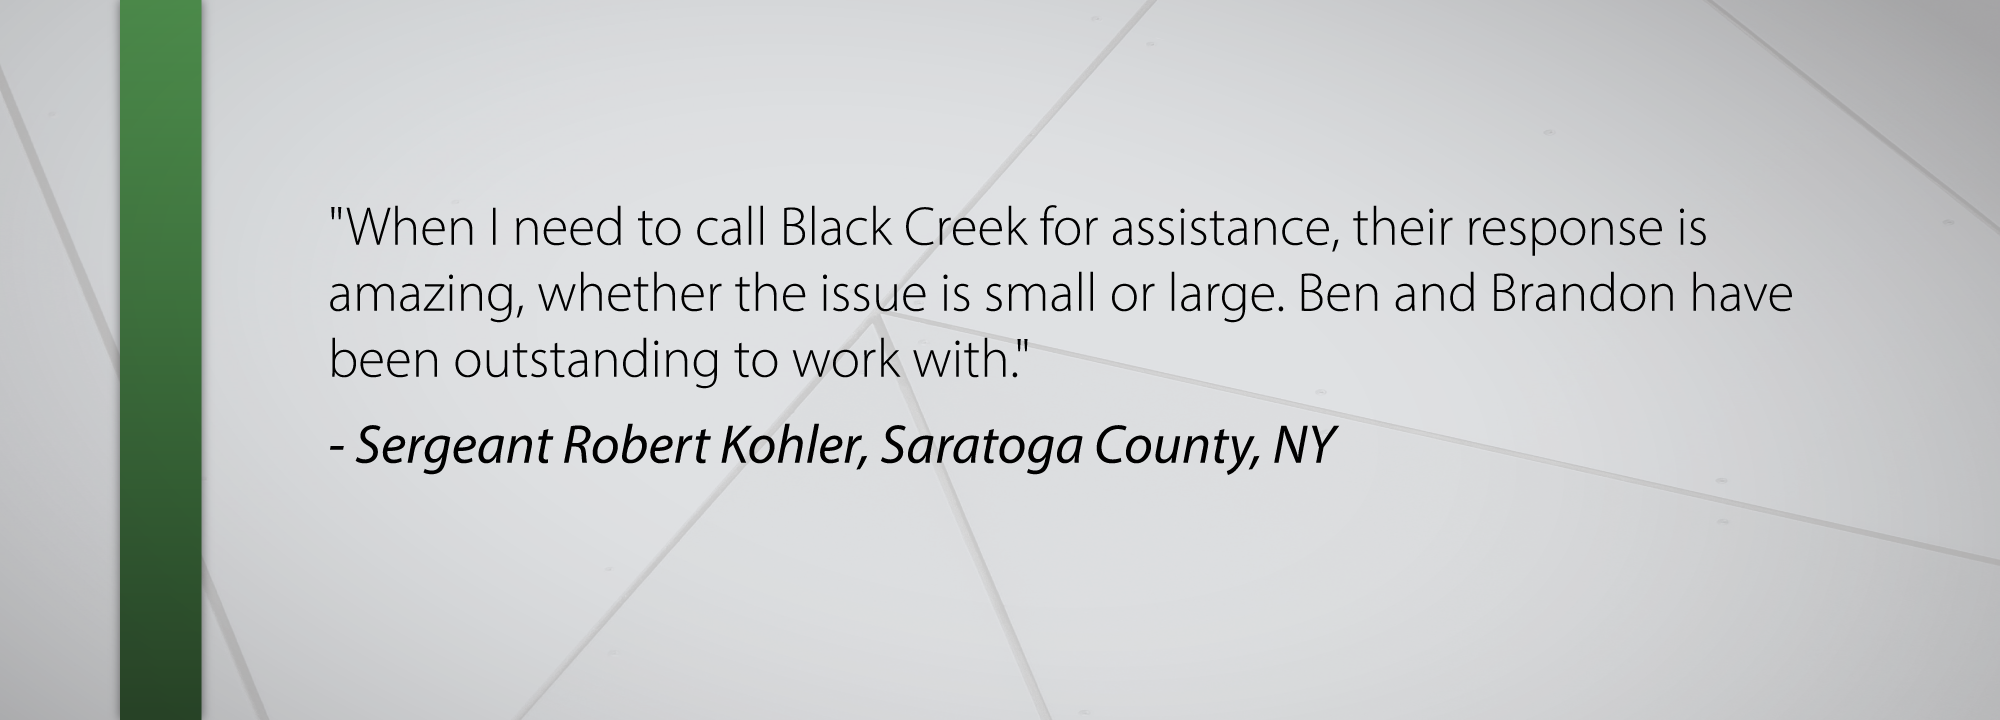 When I need to call Black Creek for assistance, their response is amazing, whether the issue is small or large. Ben and Brandon have been outstanding to work with. - Sergeant Robert Kohler, Saratoga, NY